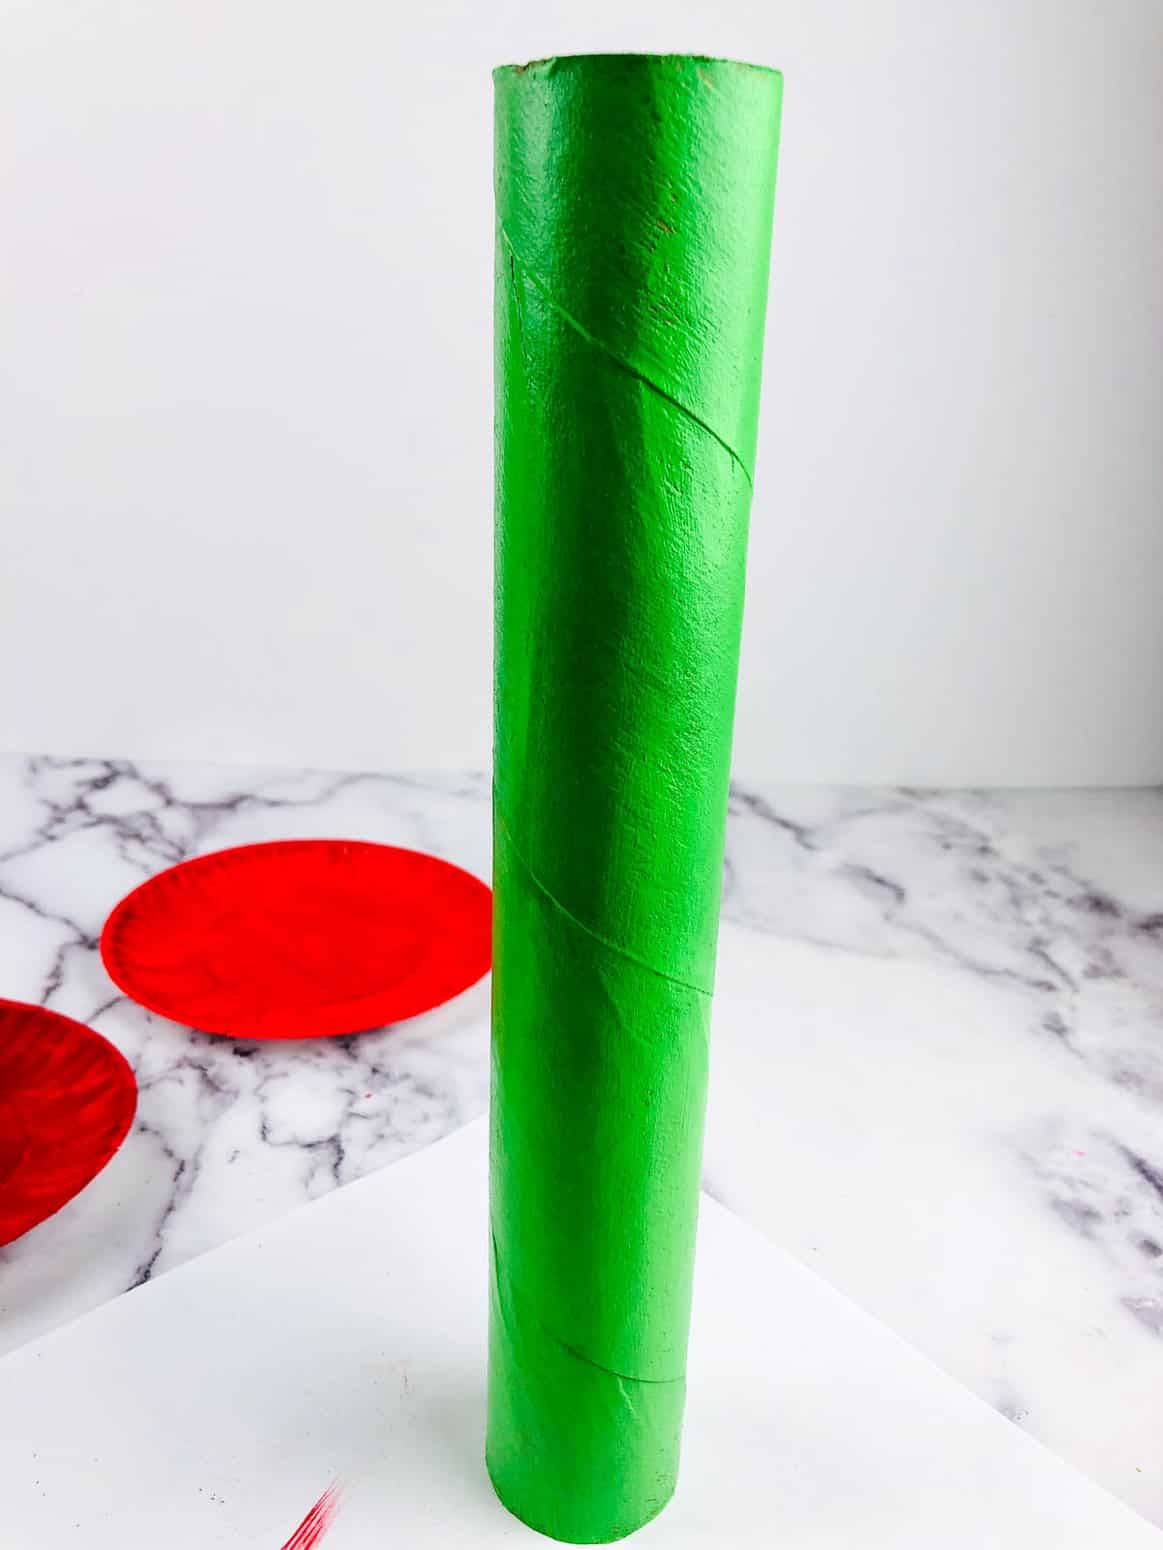 paint paper towel roll green for easy bird feeder